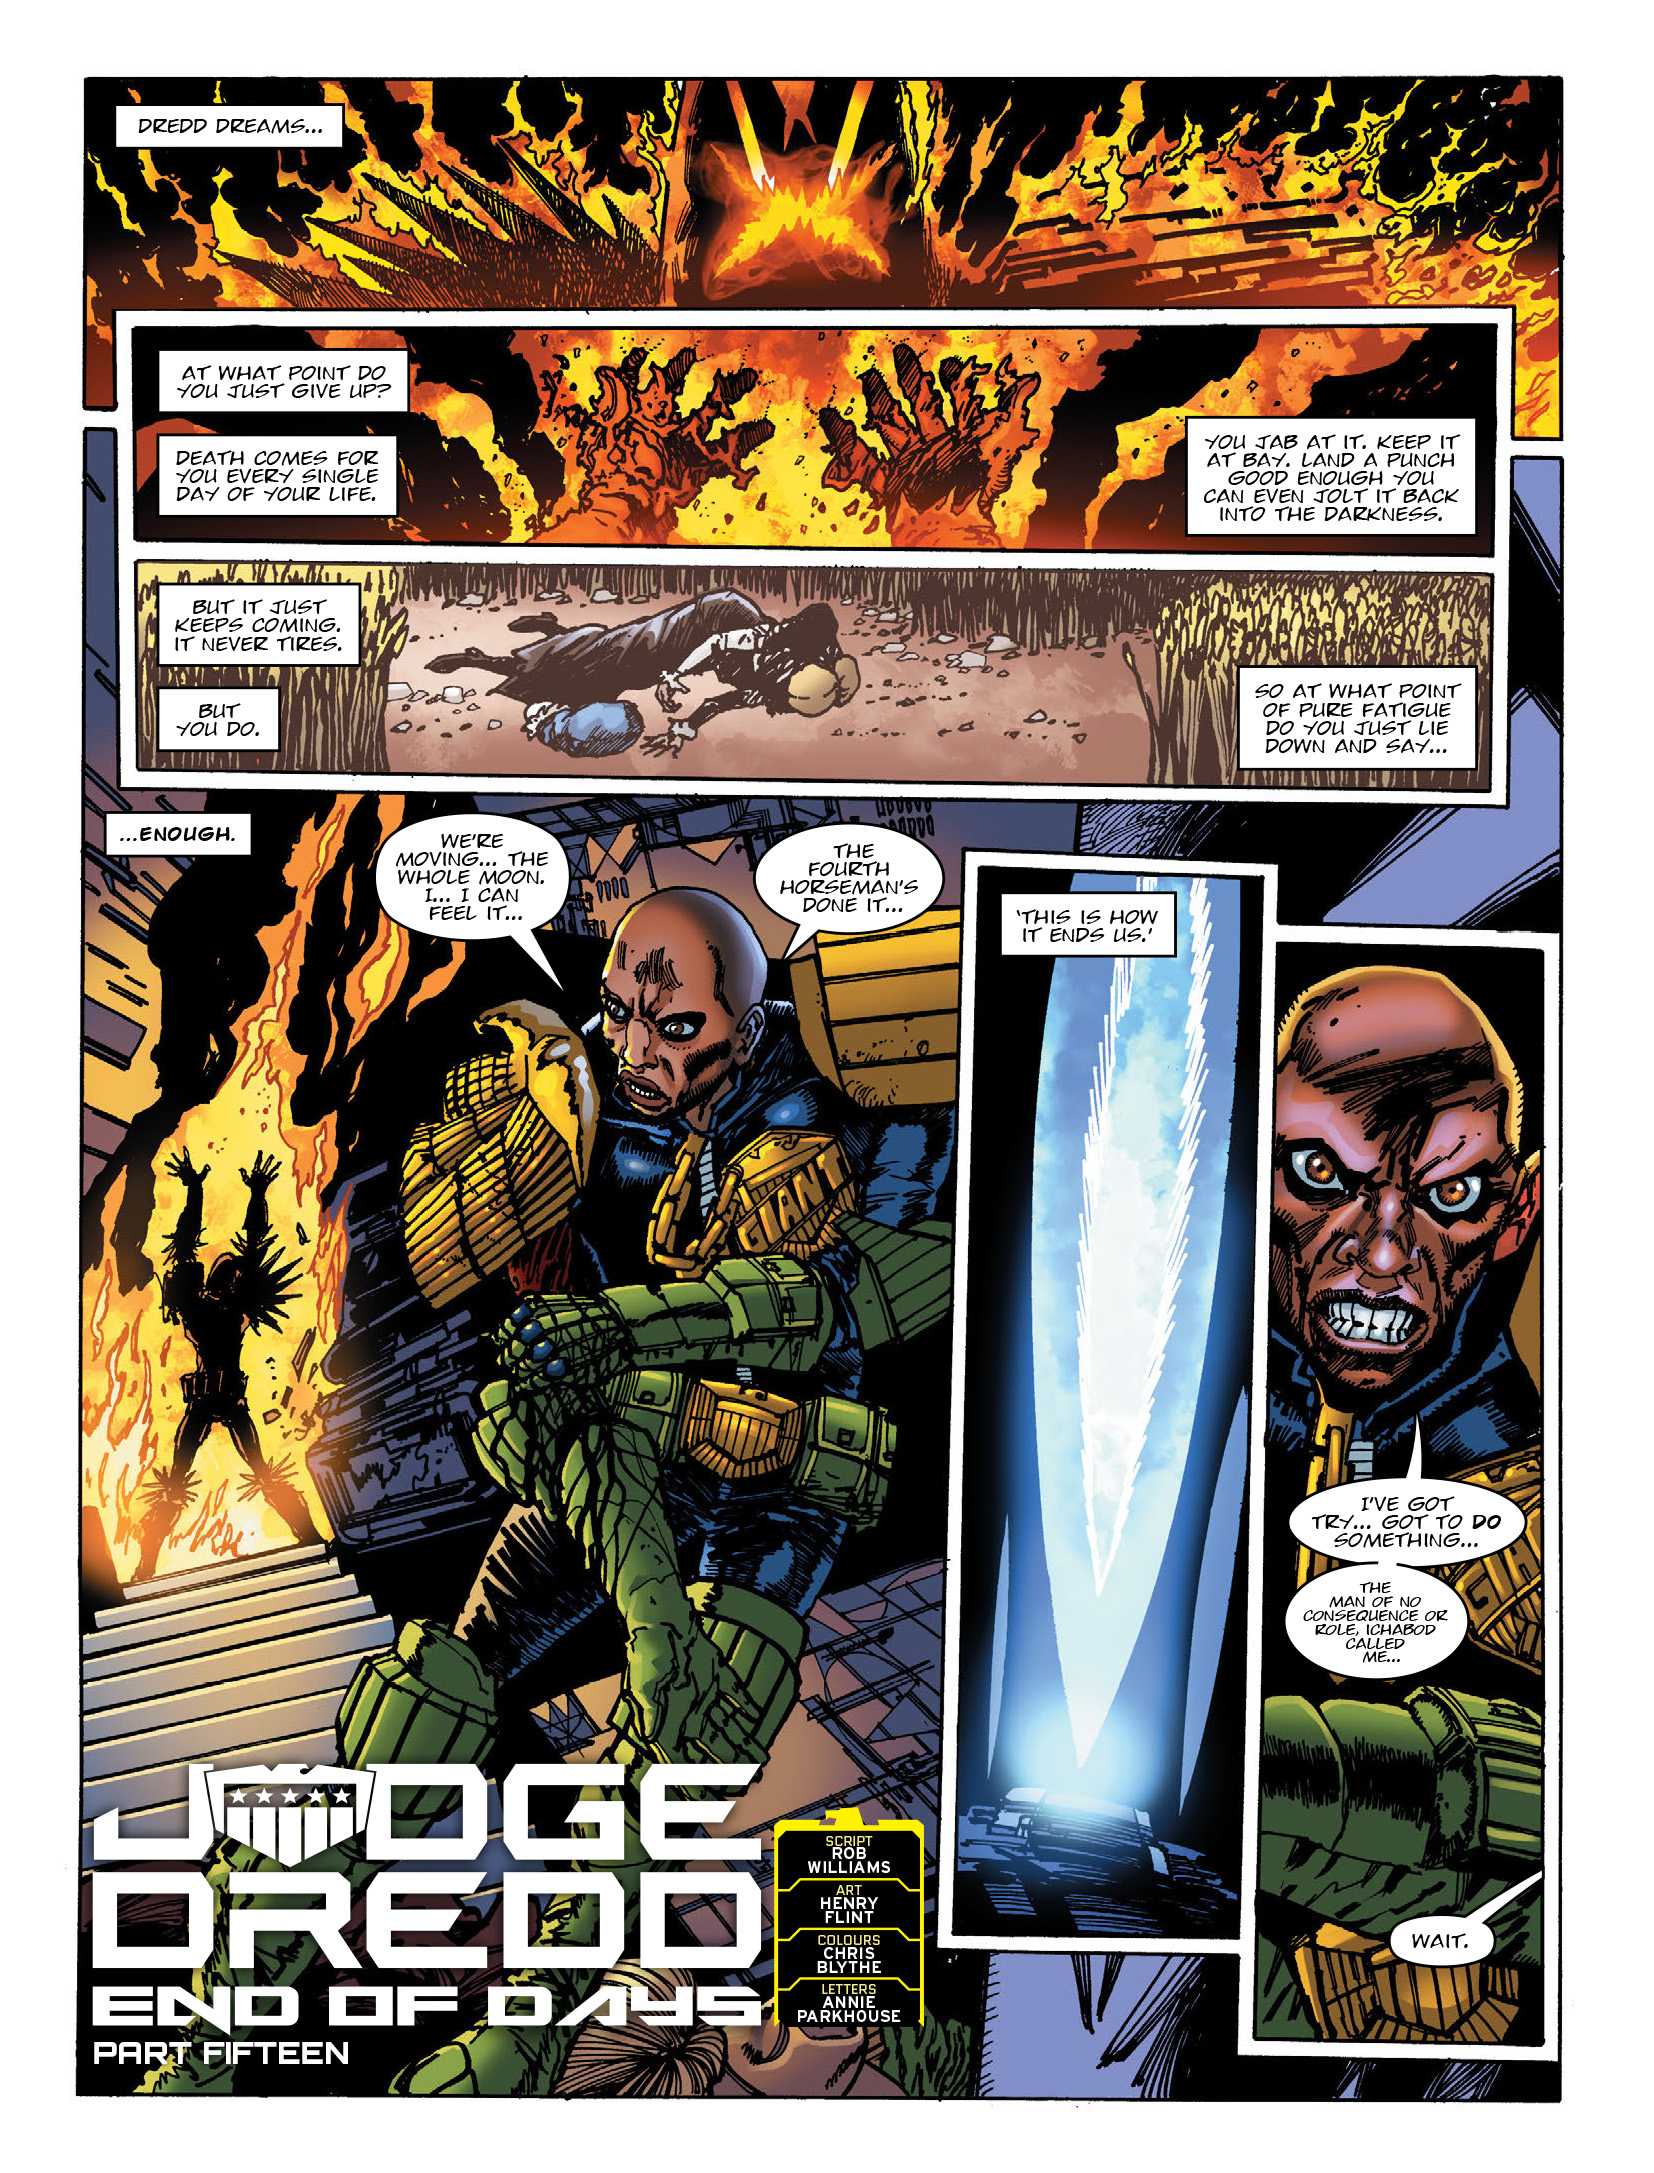 2000 AD: Chapter 2199 - Page 3